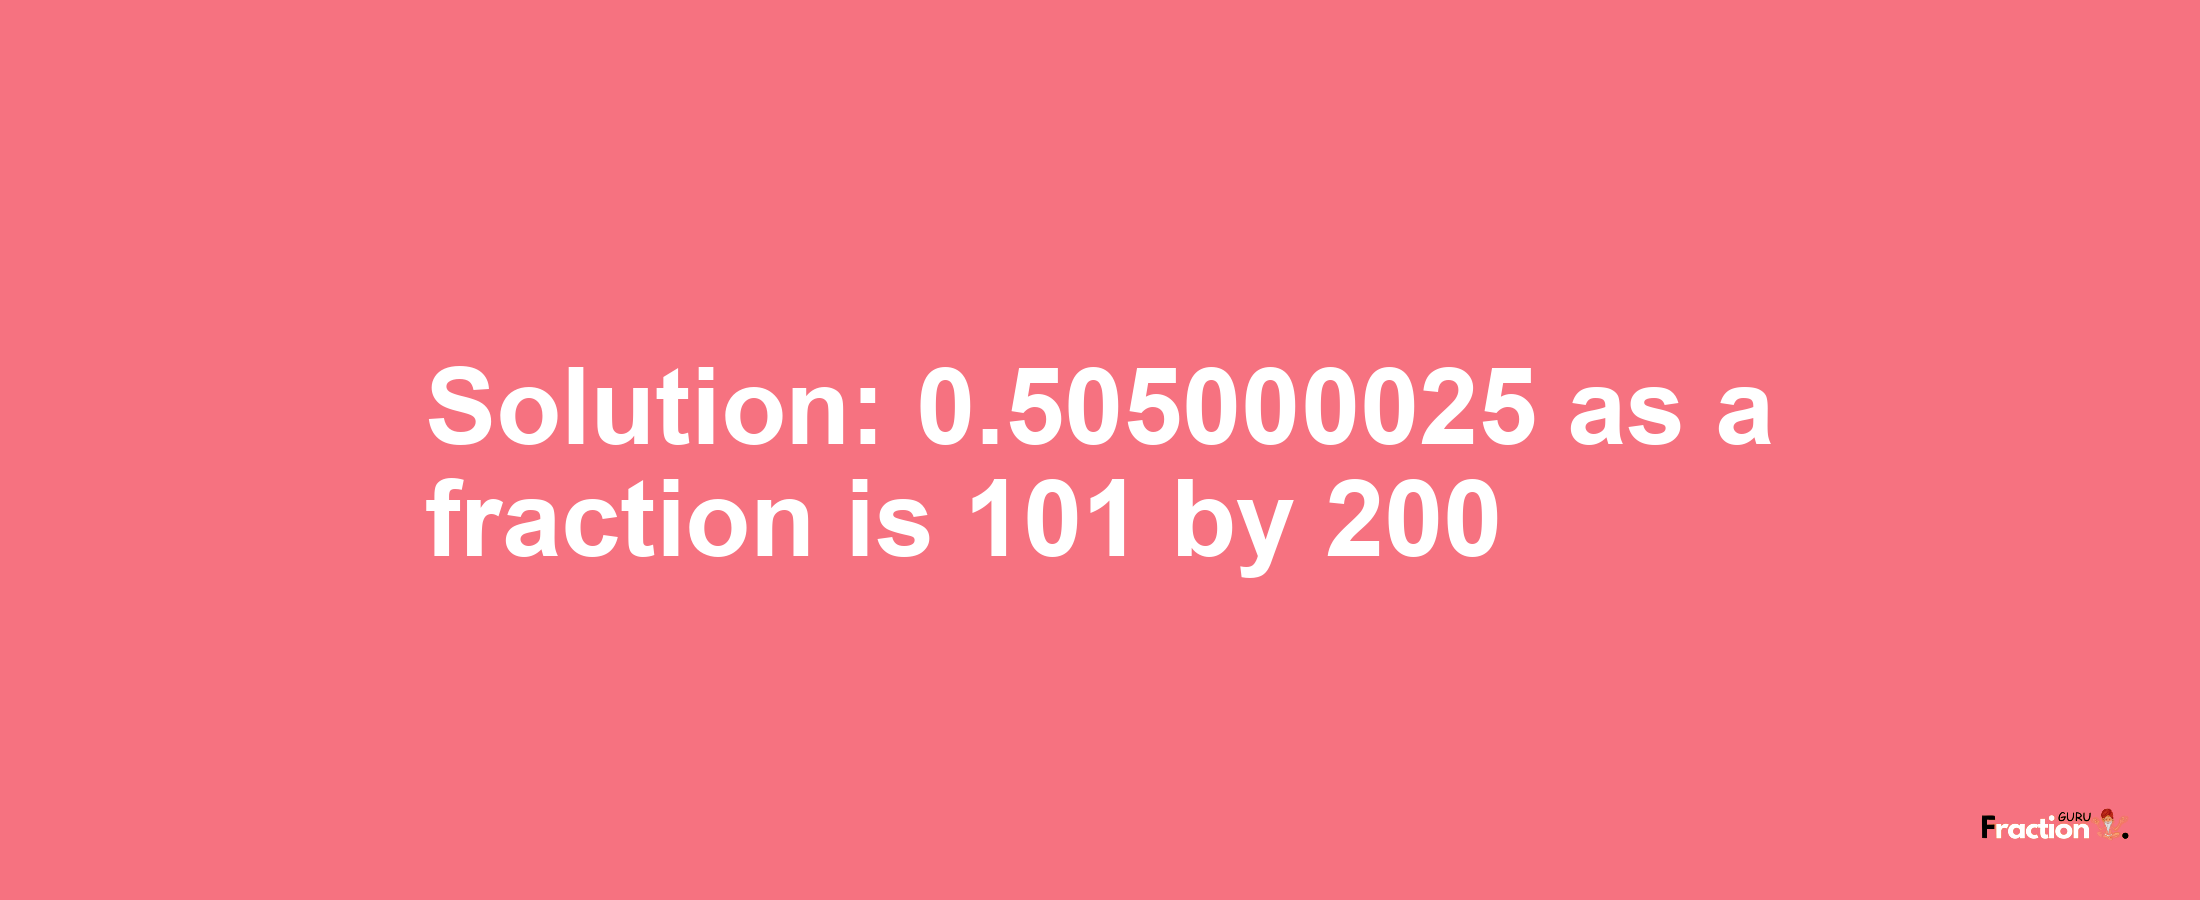 Solution:0.505000025 as a fraction is 101/200